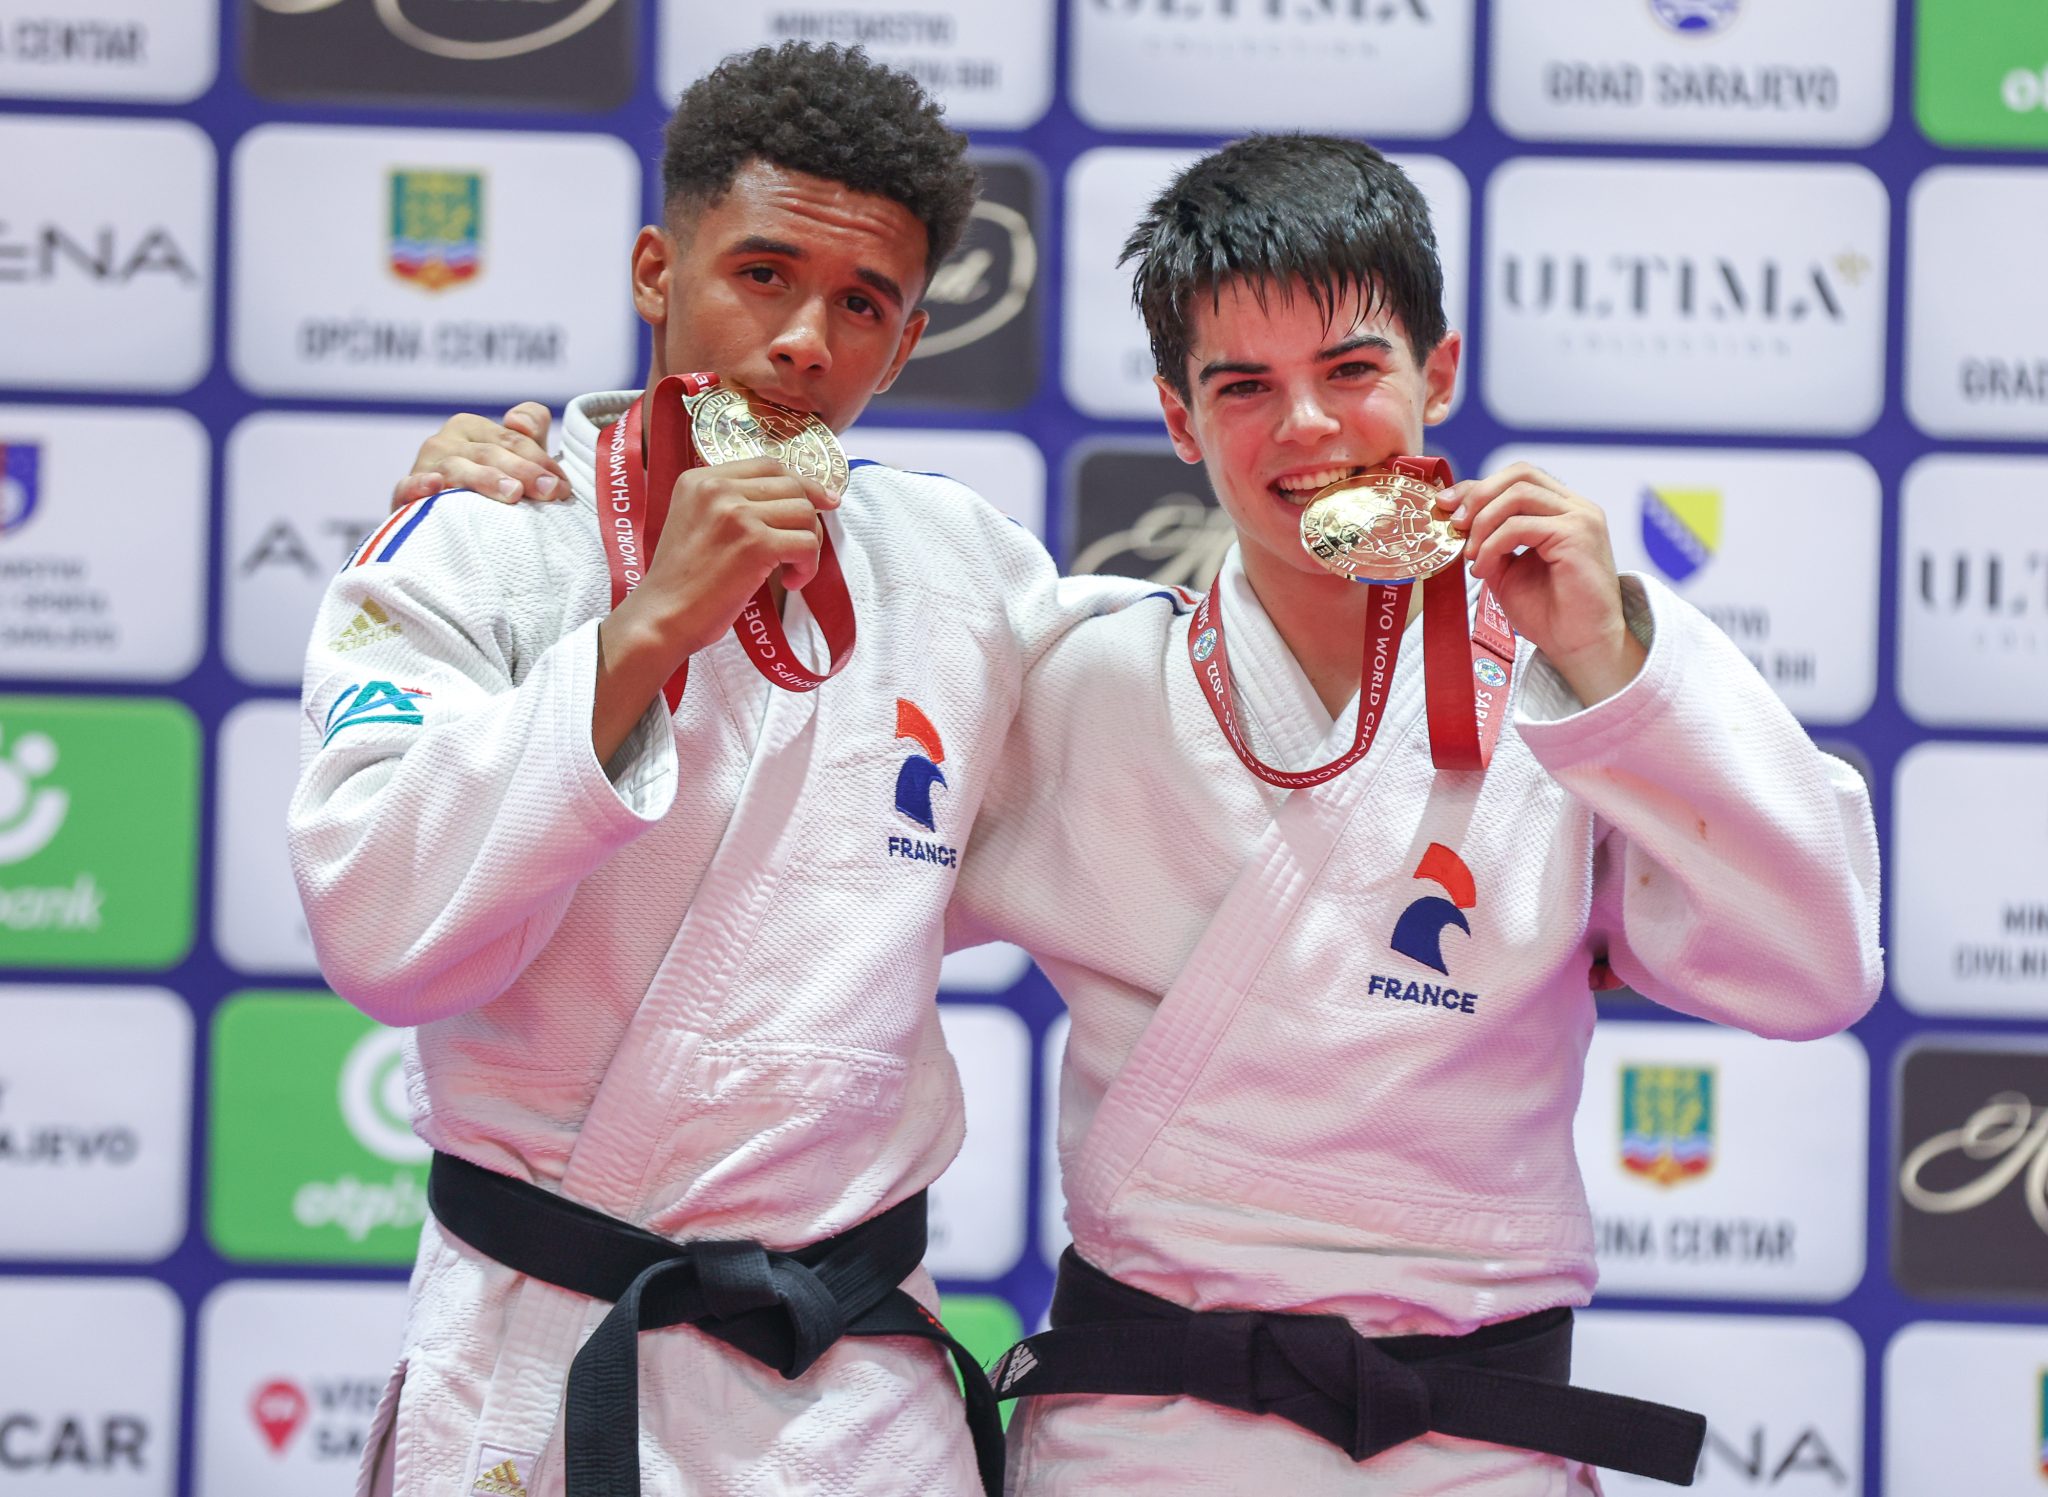 FRANCE TAKE THE LEAD WITH TWO GOLD ON DAY ONE IN SARAJEVO